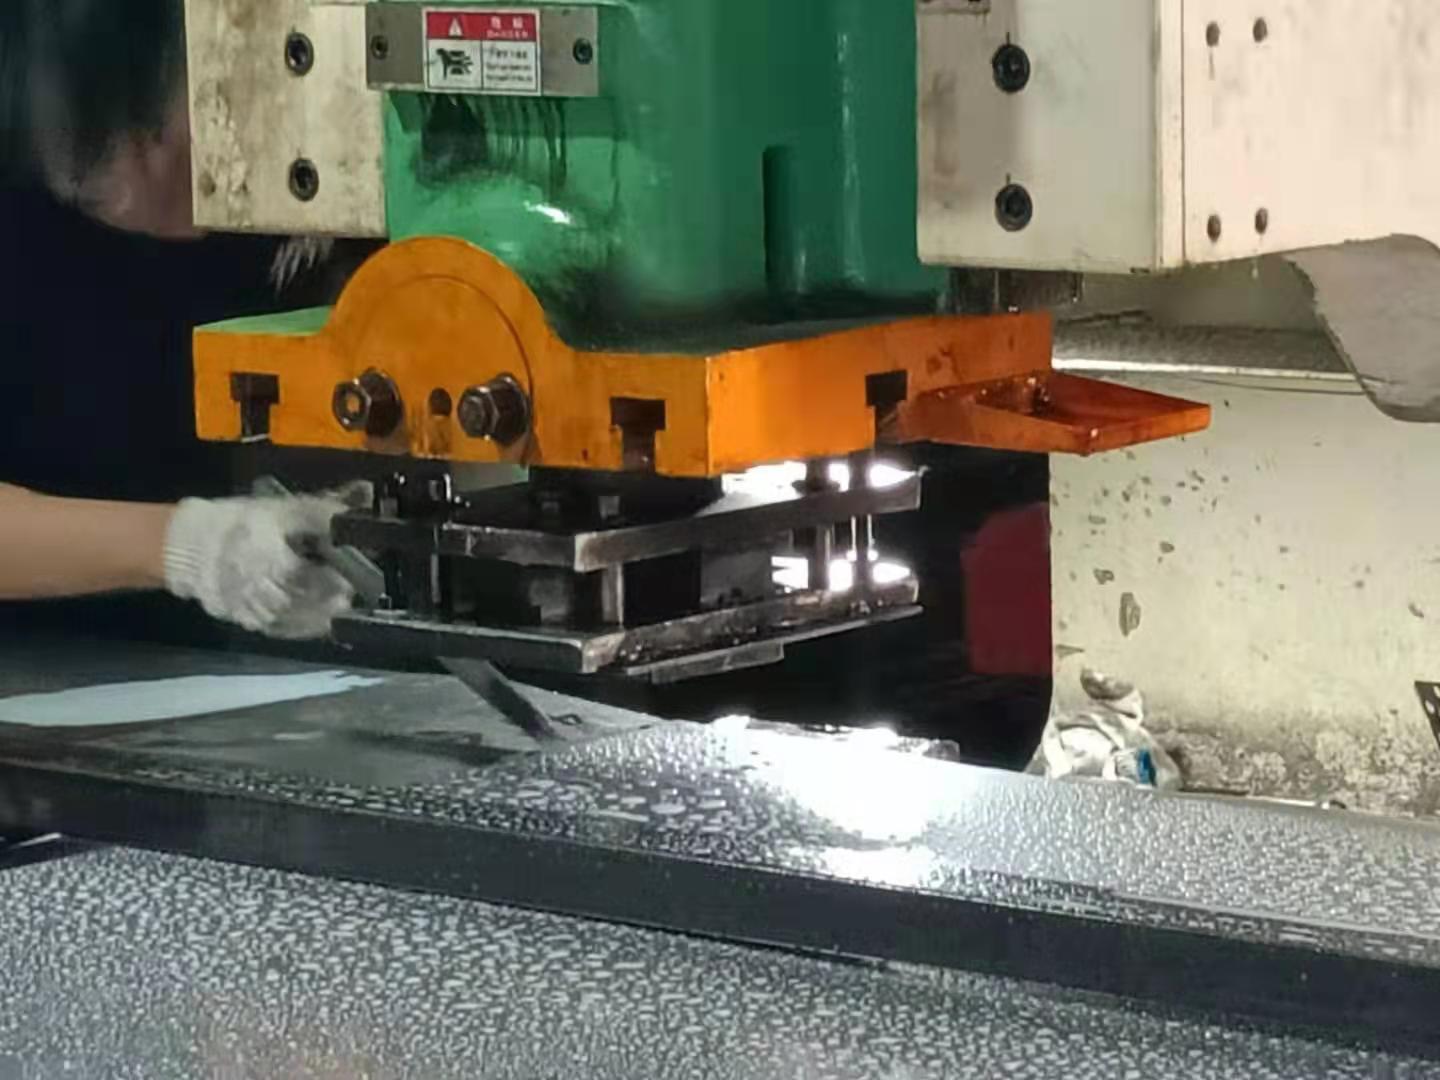 What should be paid attention to when operating the punching mesh machine?